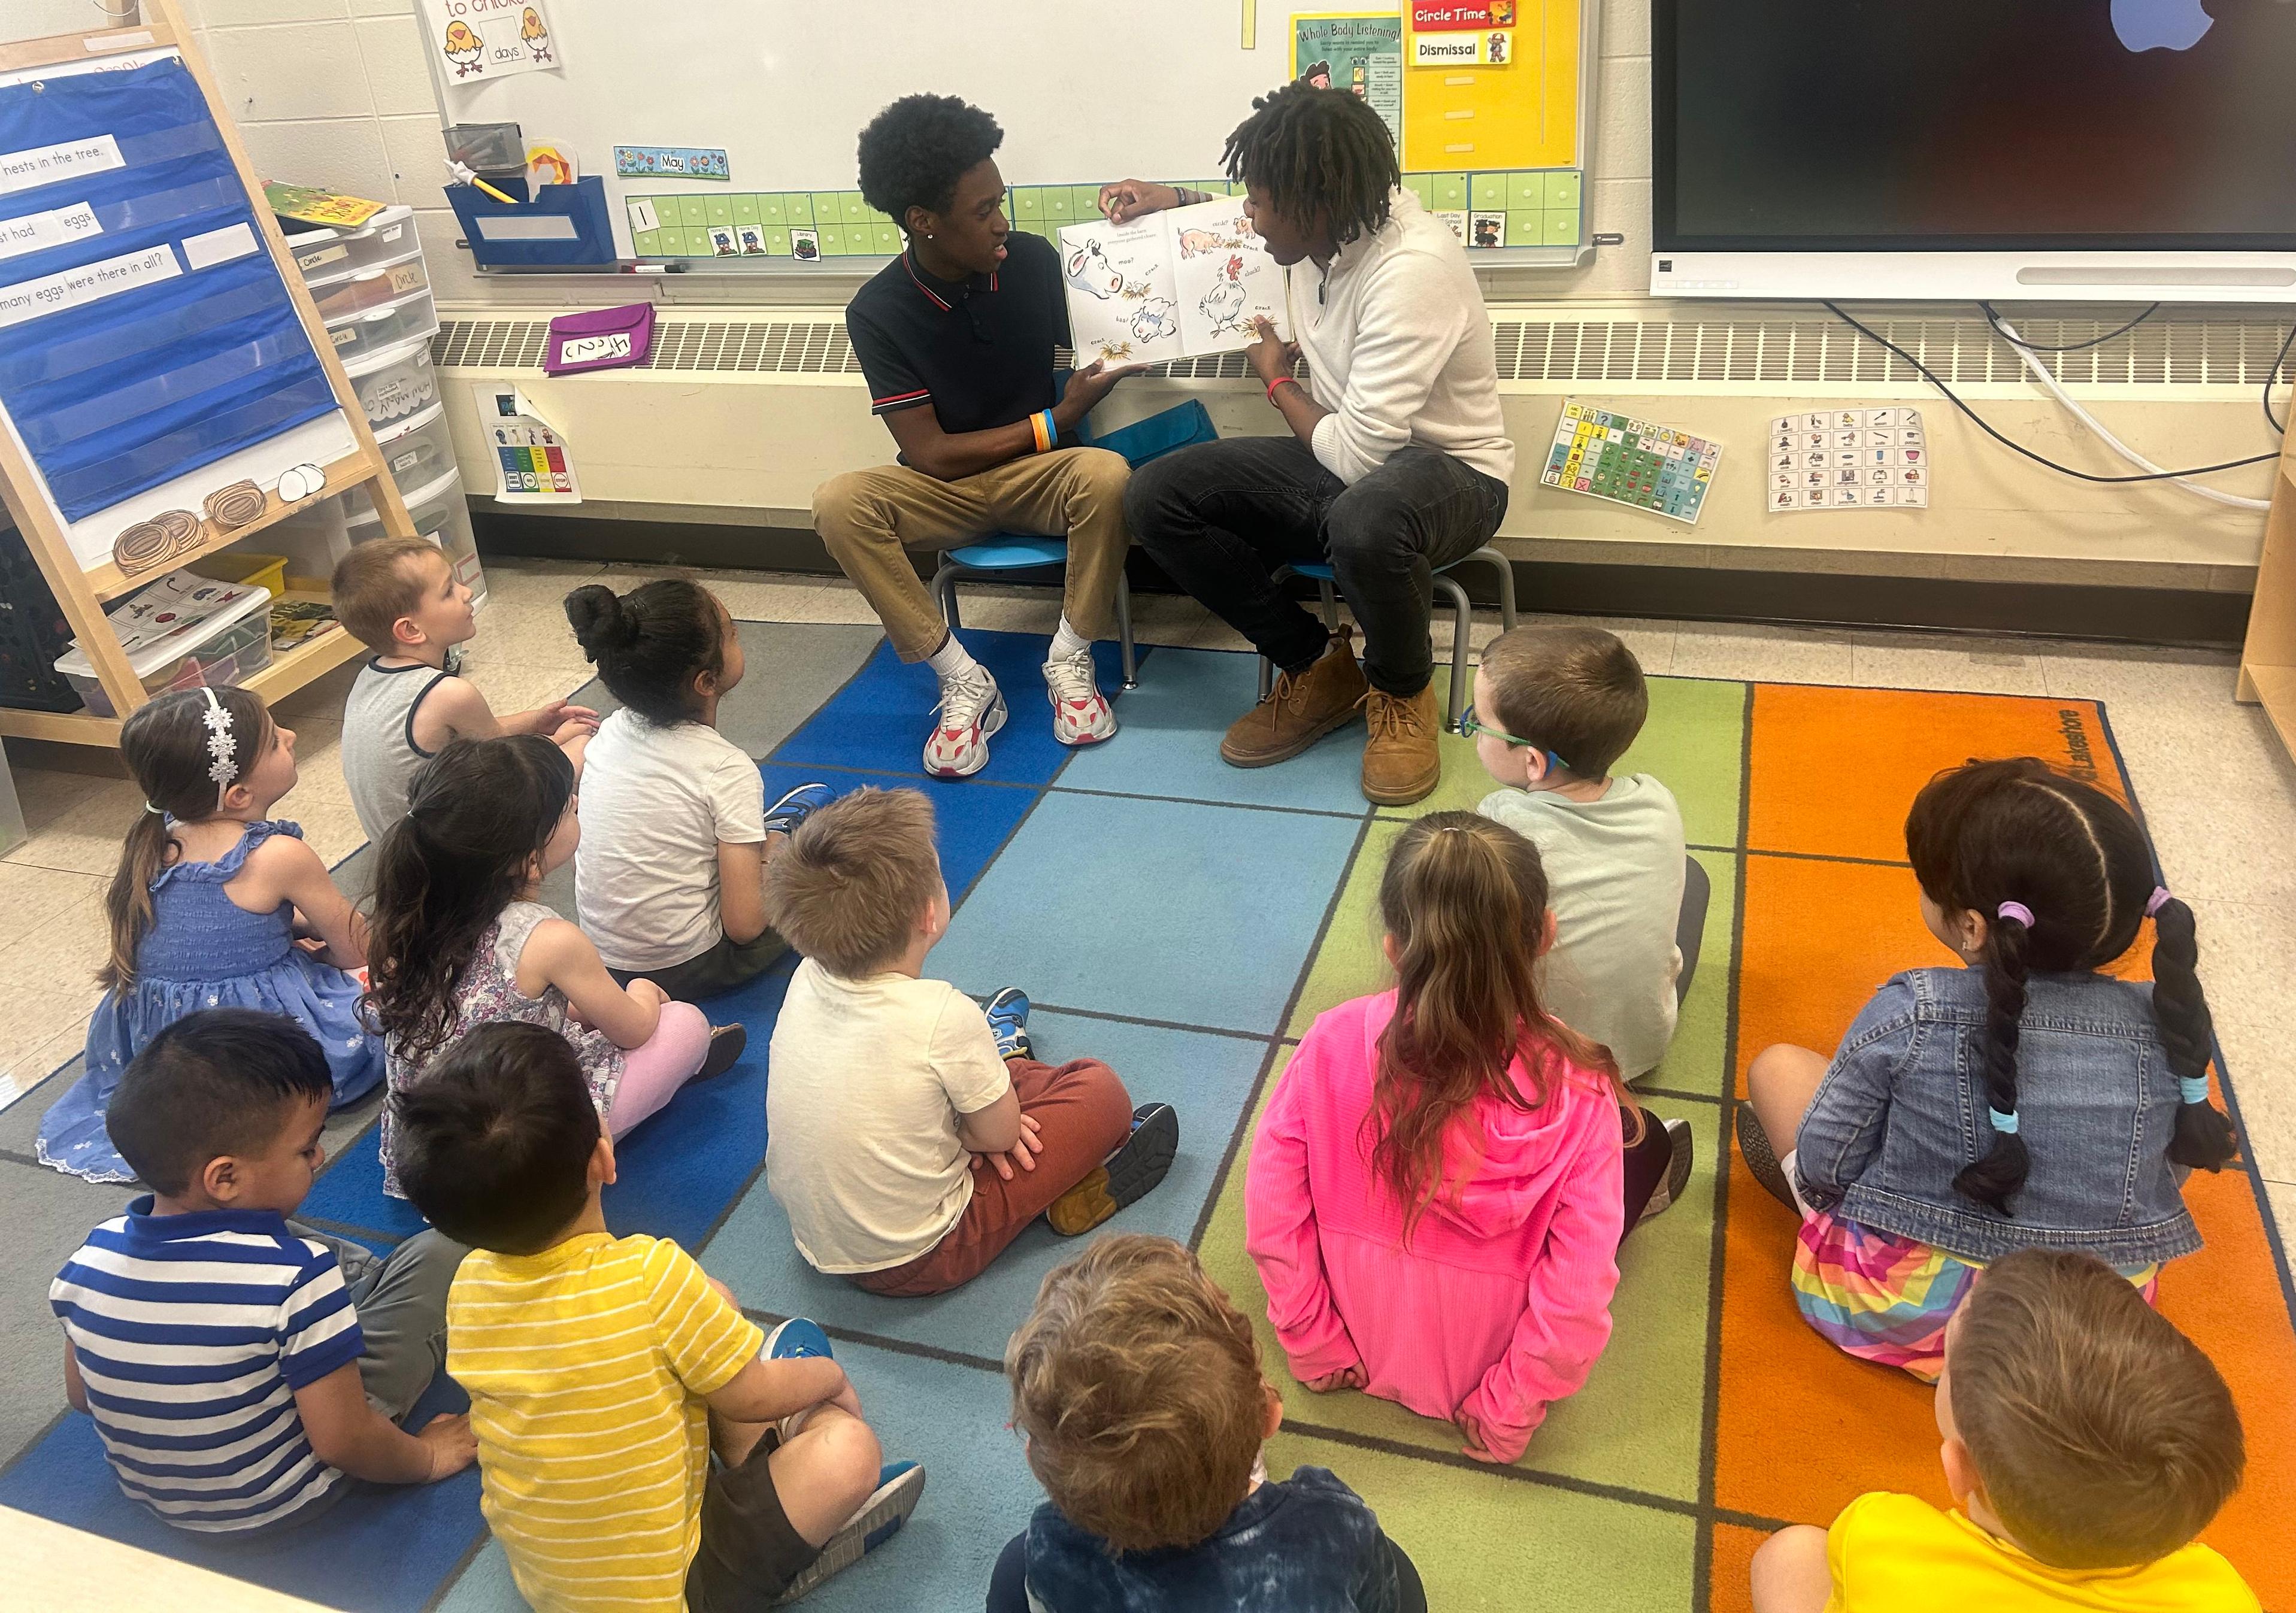 Willowbrook students serve as leaders, mentors during visits to elementary schools 